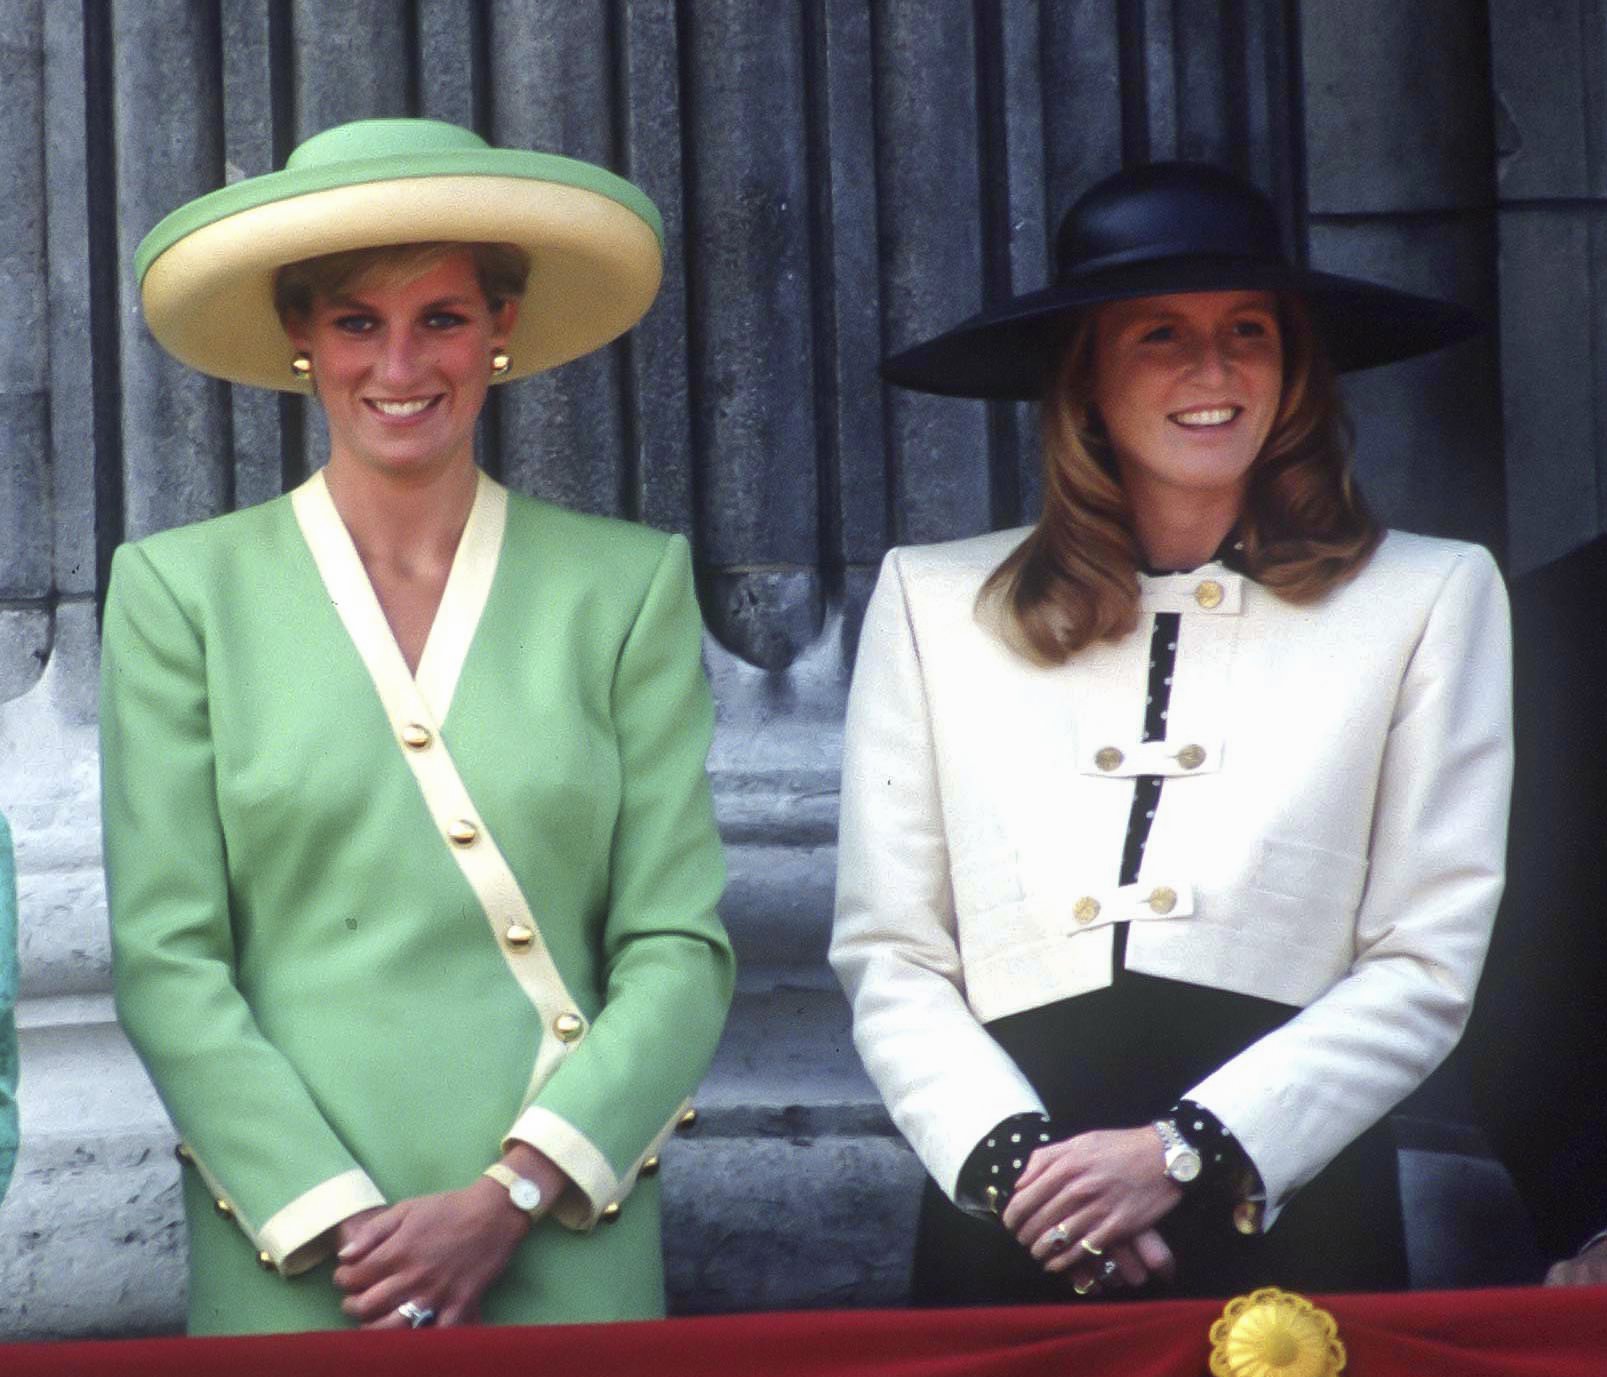  Diana, Princess of Wales and Sarah, Duchess of York during the 50th Anniversary of The Battle of Britain Parade, on the balcony of Buckingham Palace, on September 15, 1990 in, London, United Kingdom. | Photo: Getty Images